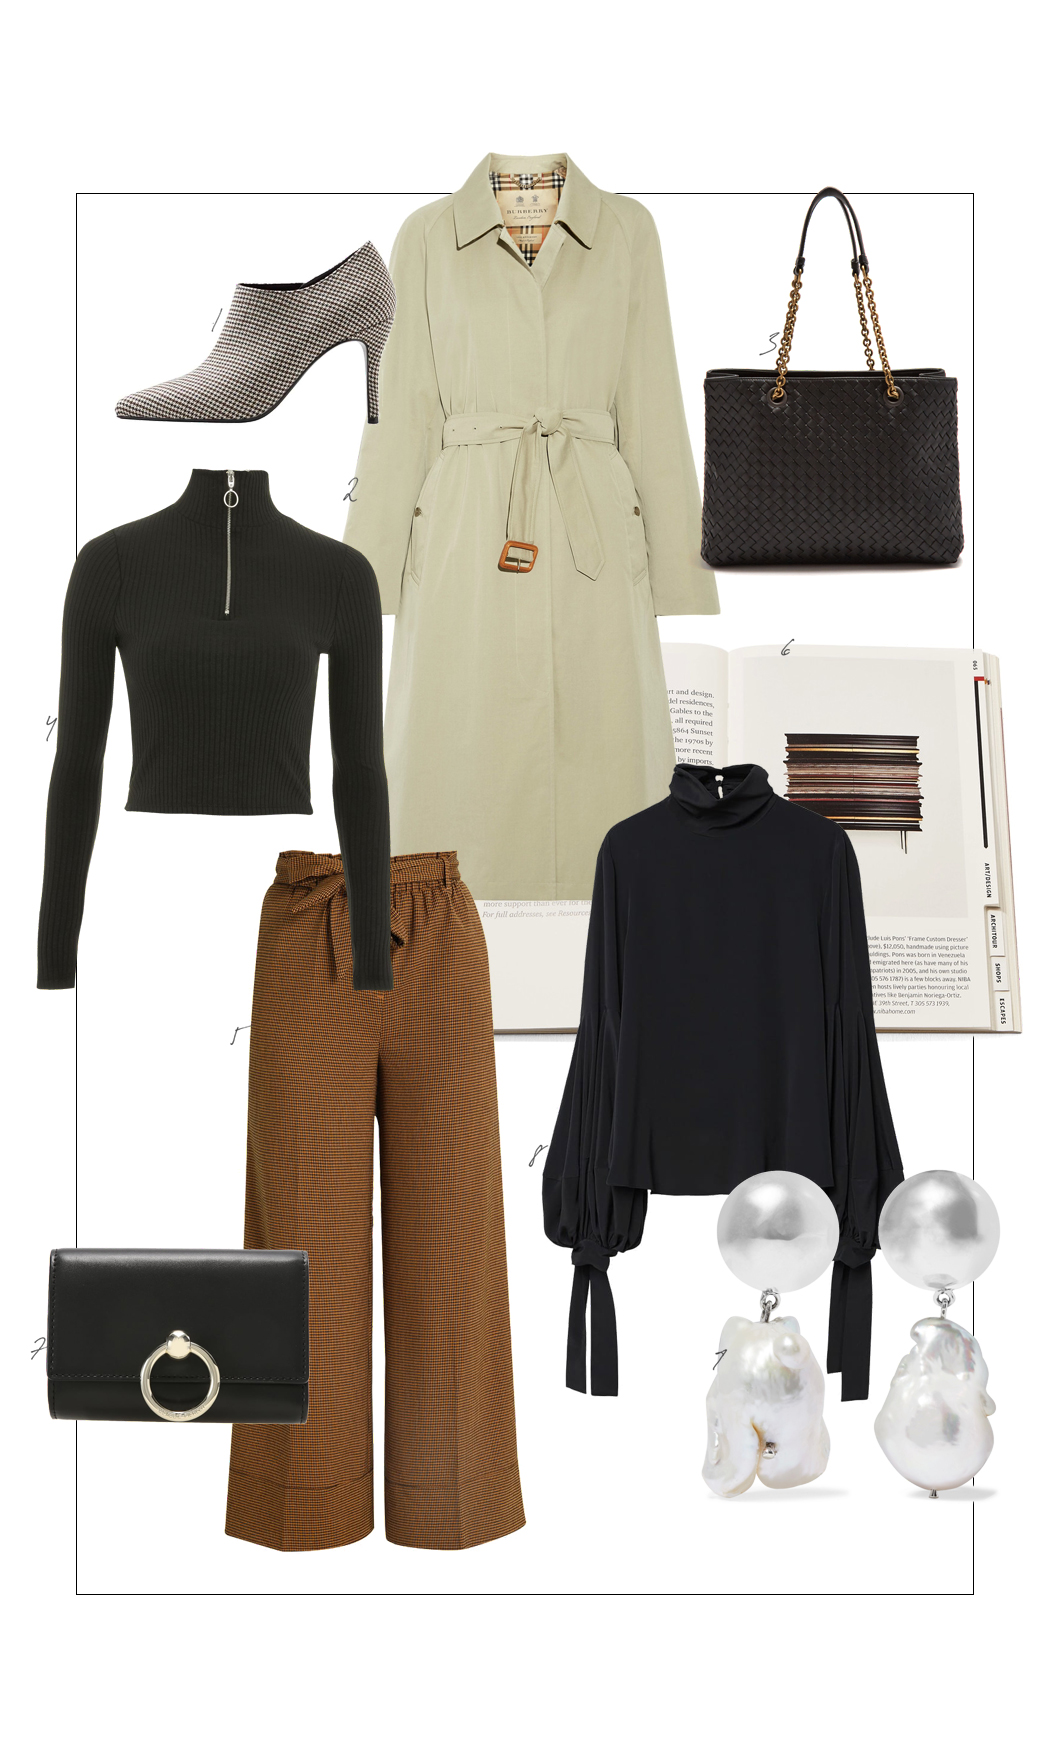 THE EDIT: Monday Attire with BURBERRY TRENCHCOAT